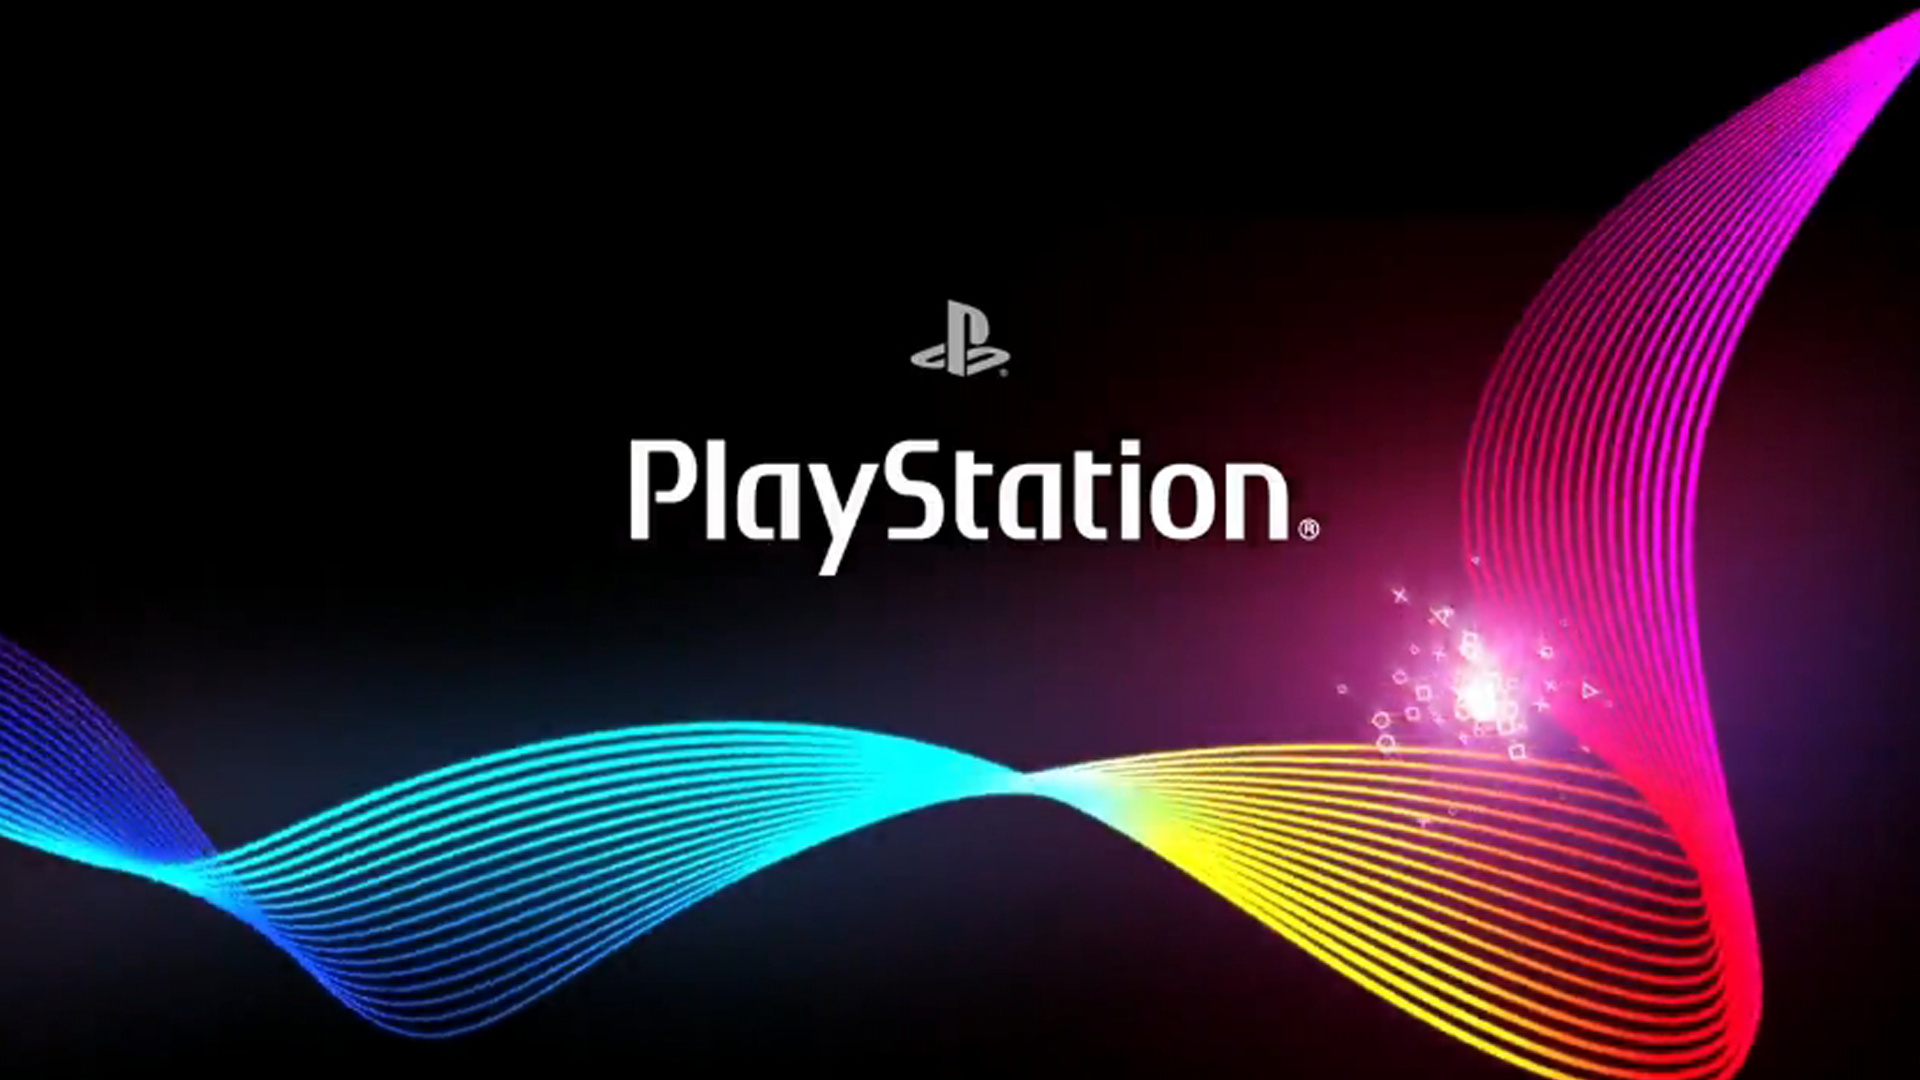 The PlayStation: A line of video game console devices designed by Sony, Gaming platforms. 1920x1080 Full HD Wallpaper.